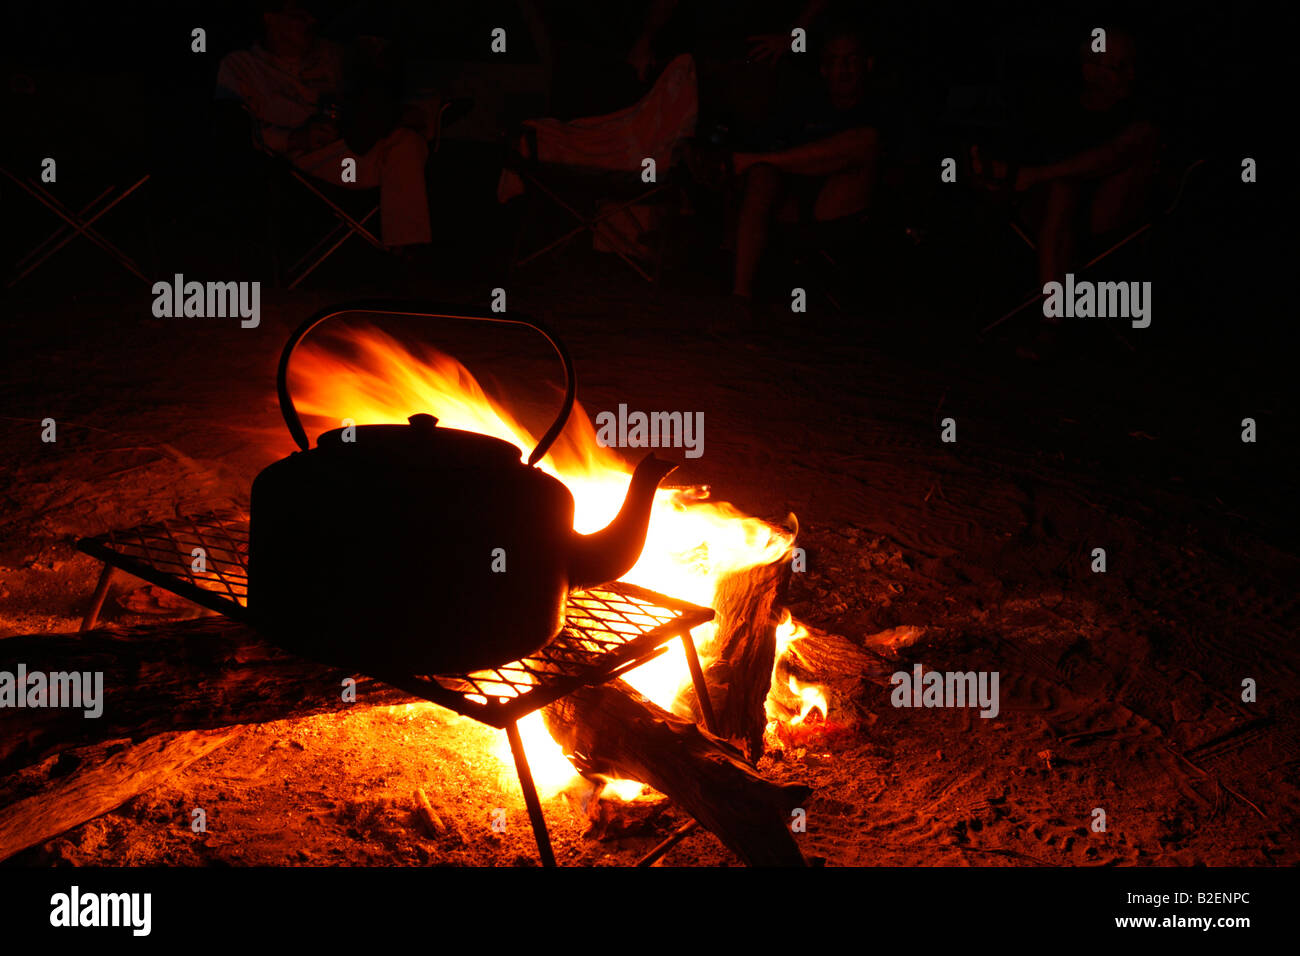 Wide angle view of a blazing log fire with a kettle in a campsite at night Stock Photo